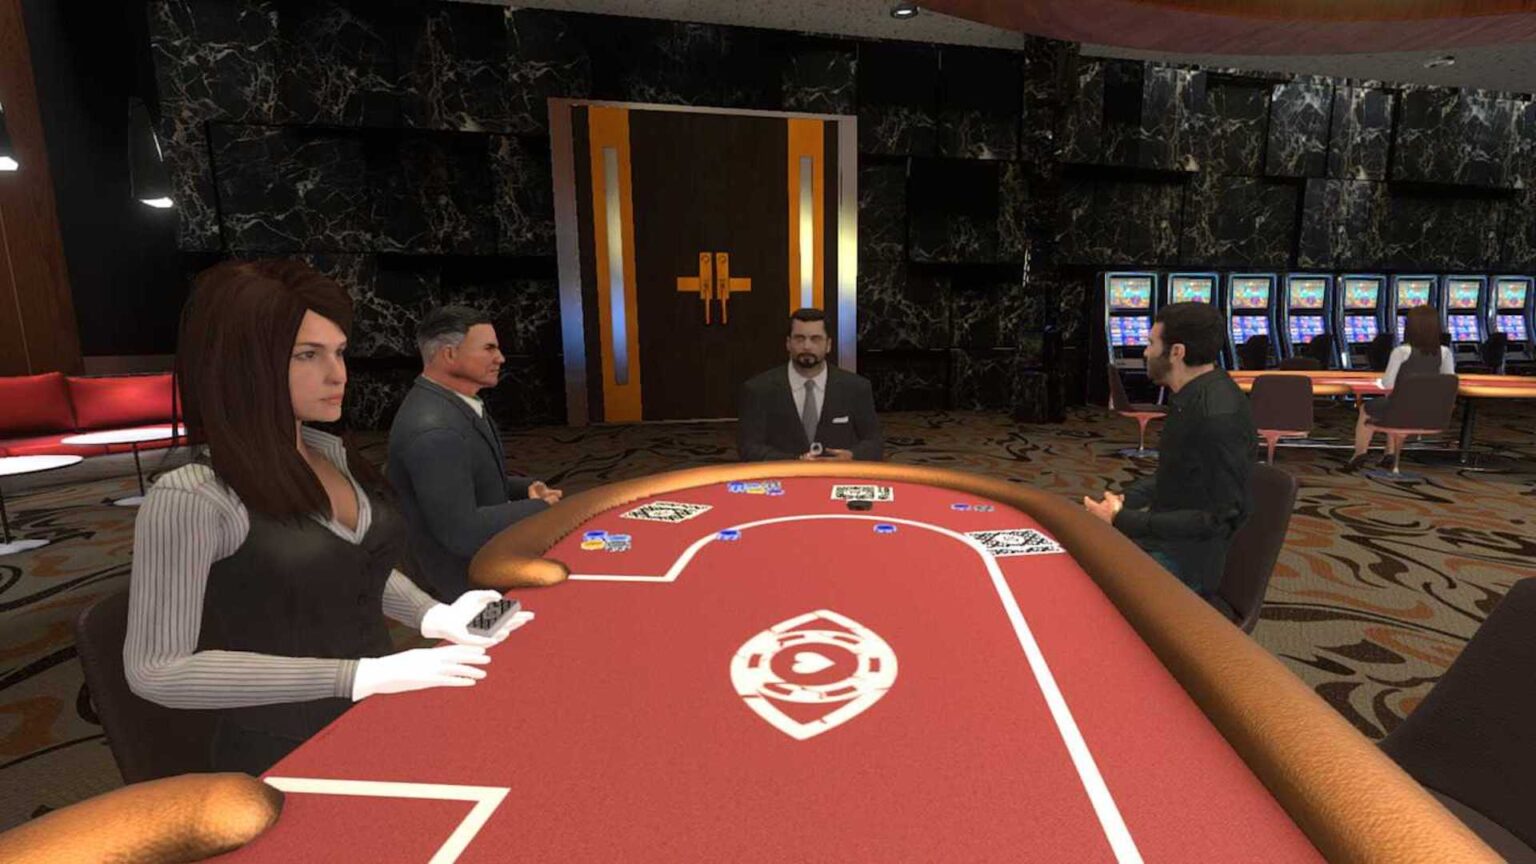 Virtual reality technology offers online casinos land-based experiences. Discover all you need to know about VR technology in virtual casinos.